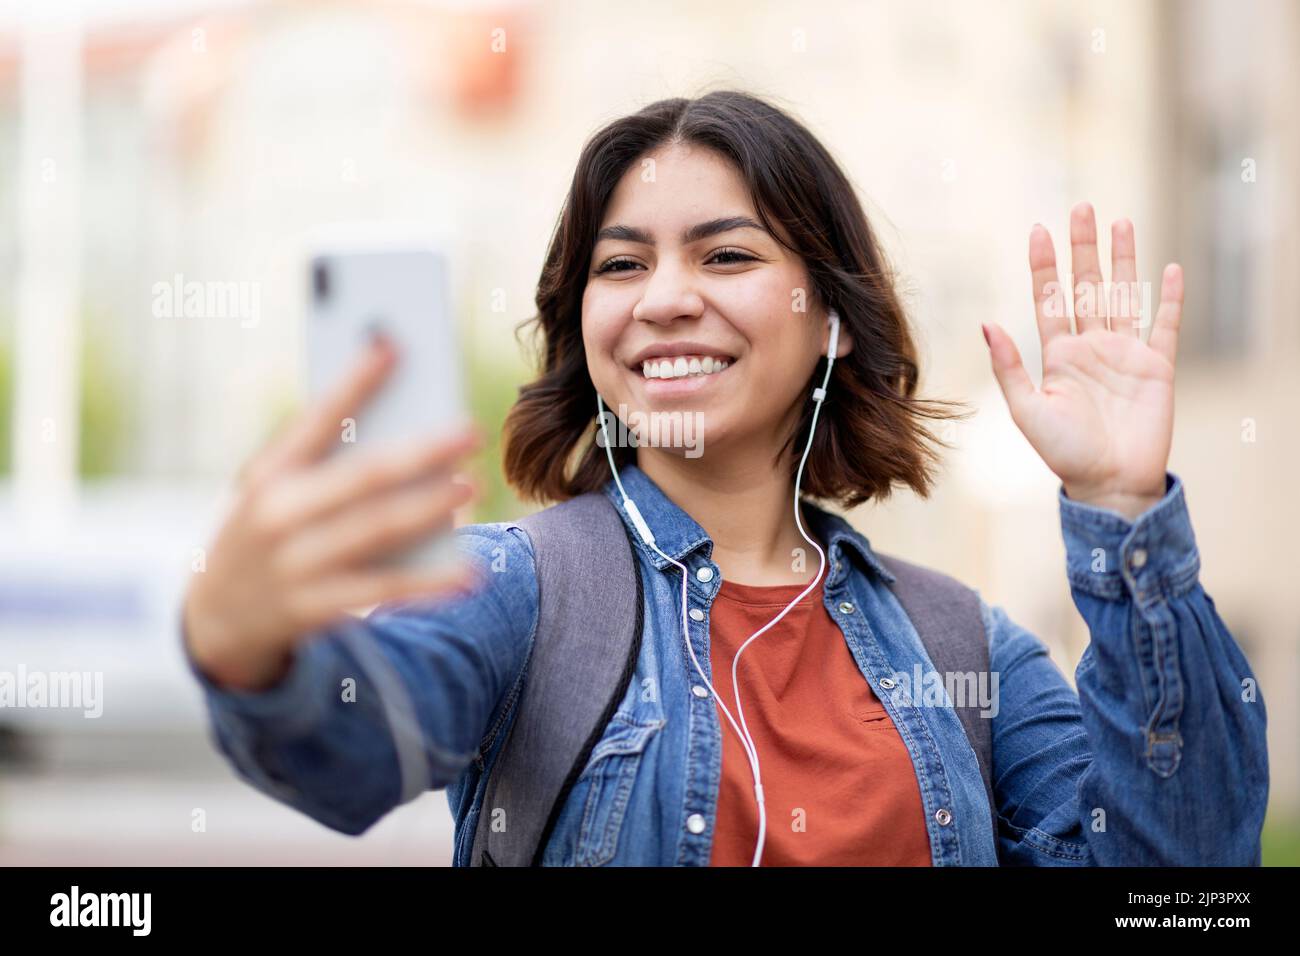 Happy young arab woman making video call via cellphone while standing outdoors Stock Photo